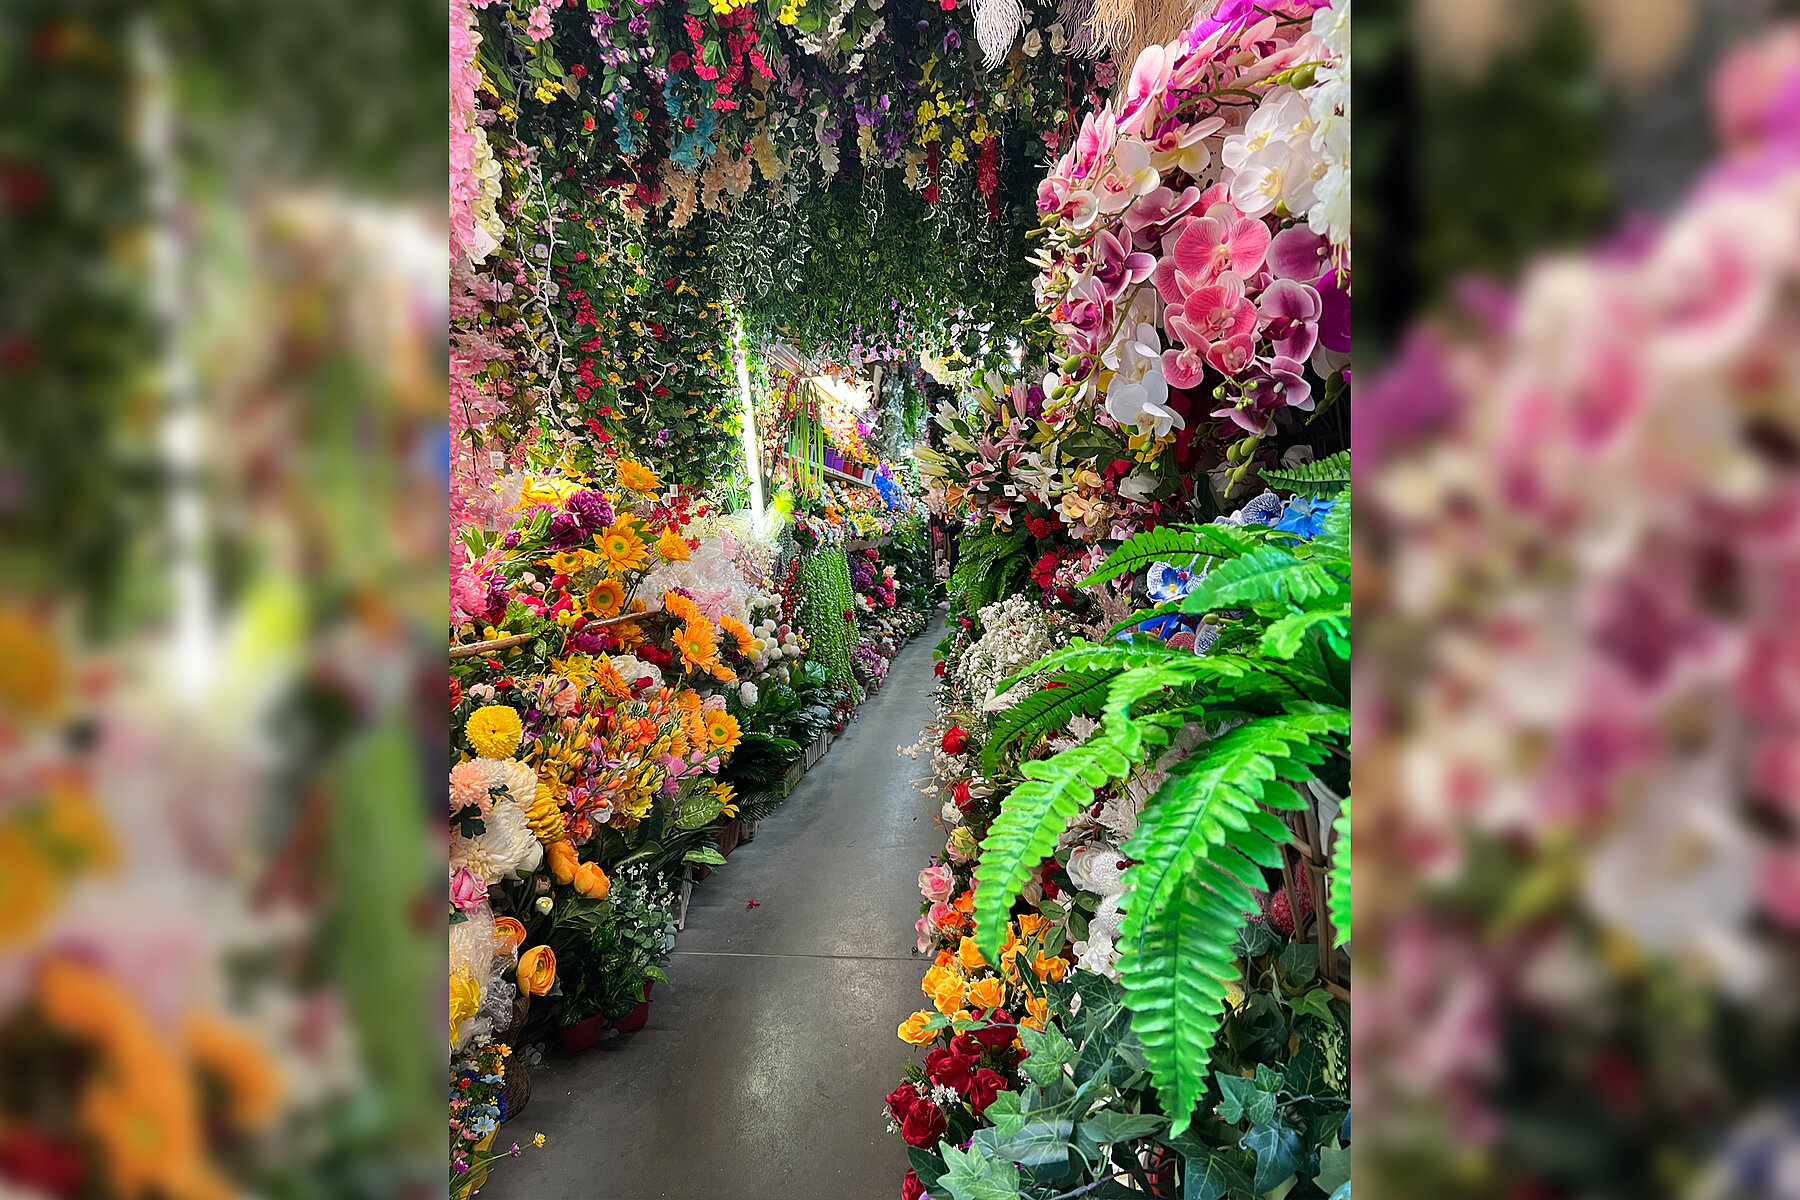 An aisle lined with flowers.